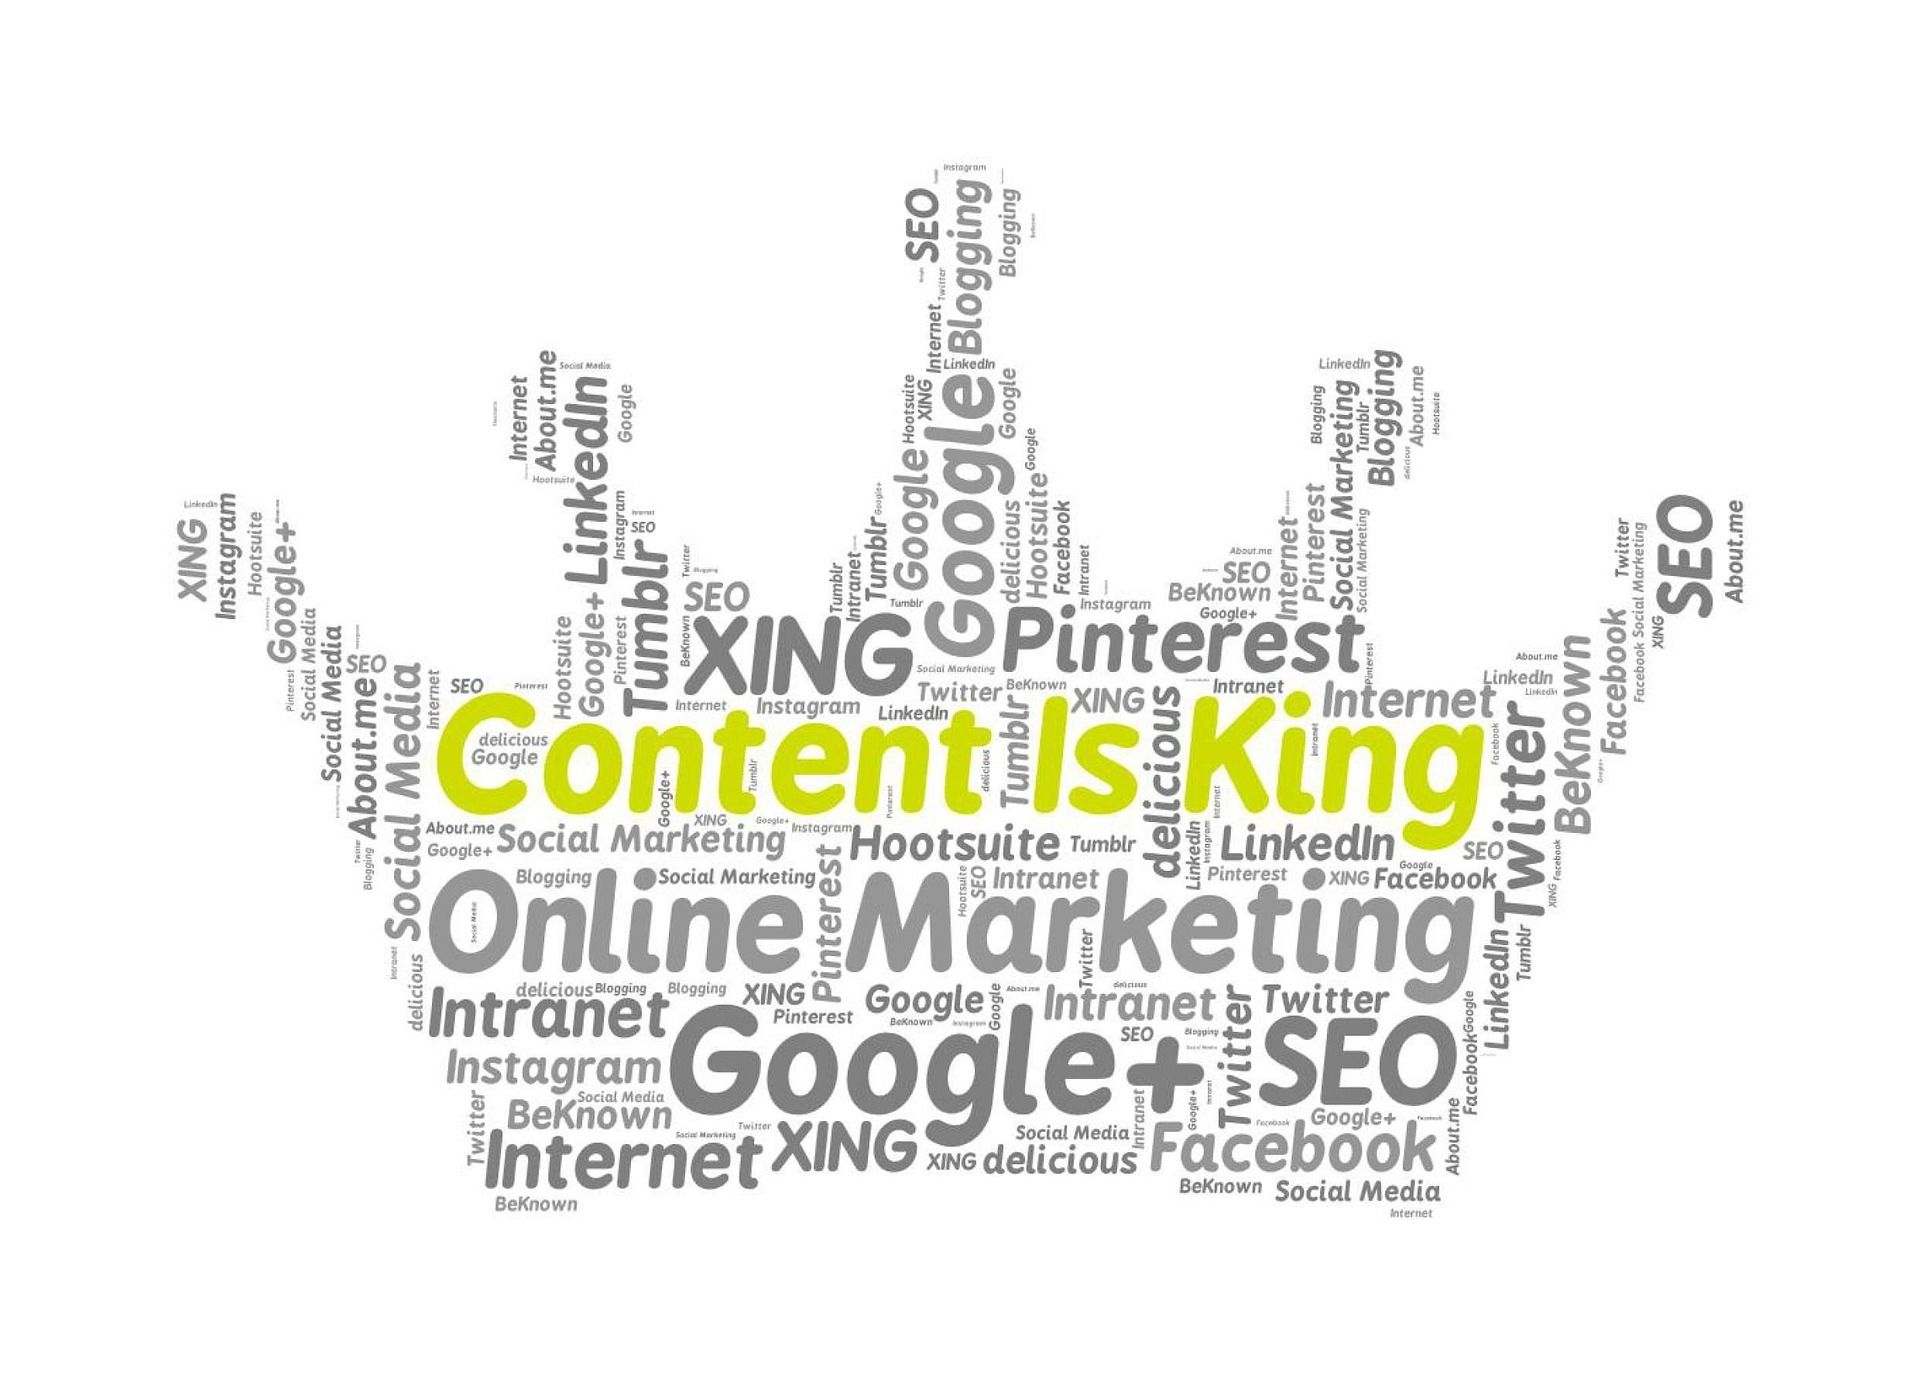 content marketing and blogging services in Ireland